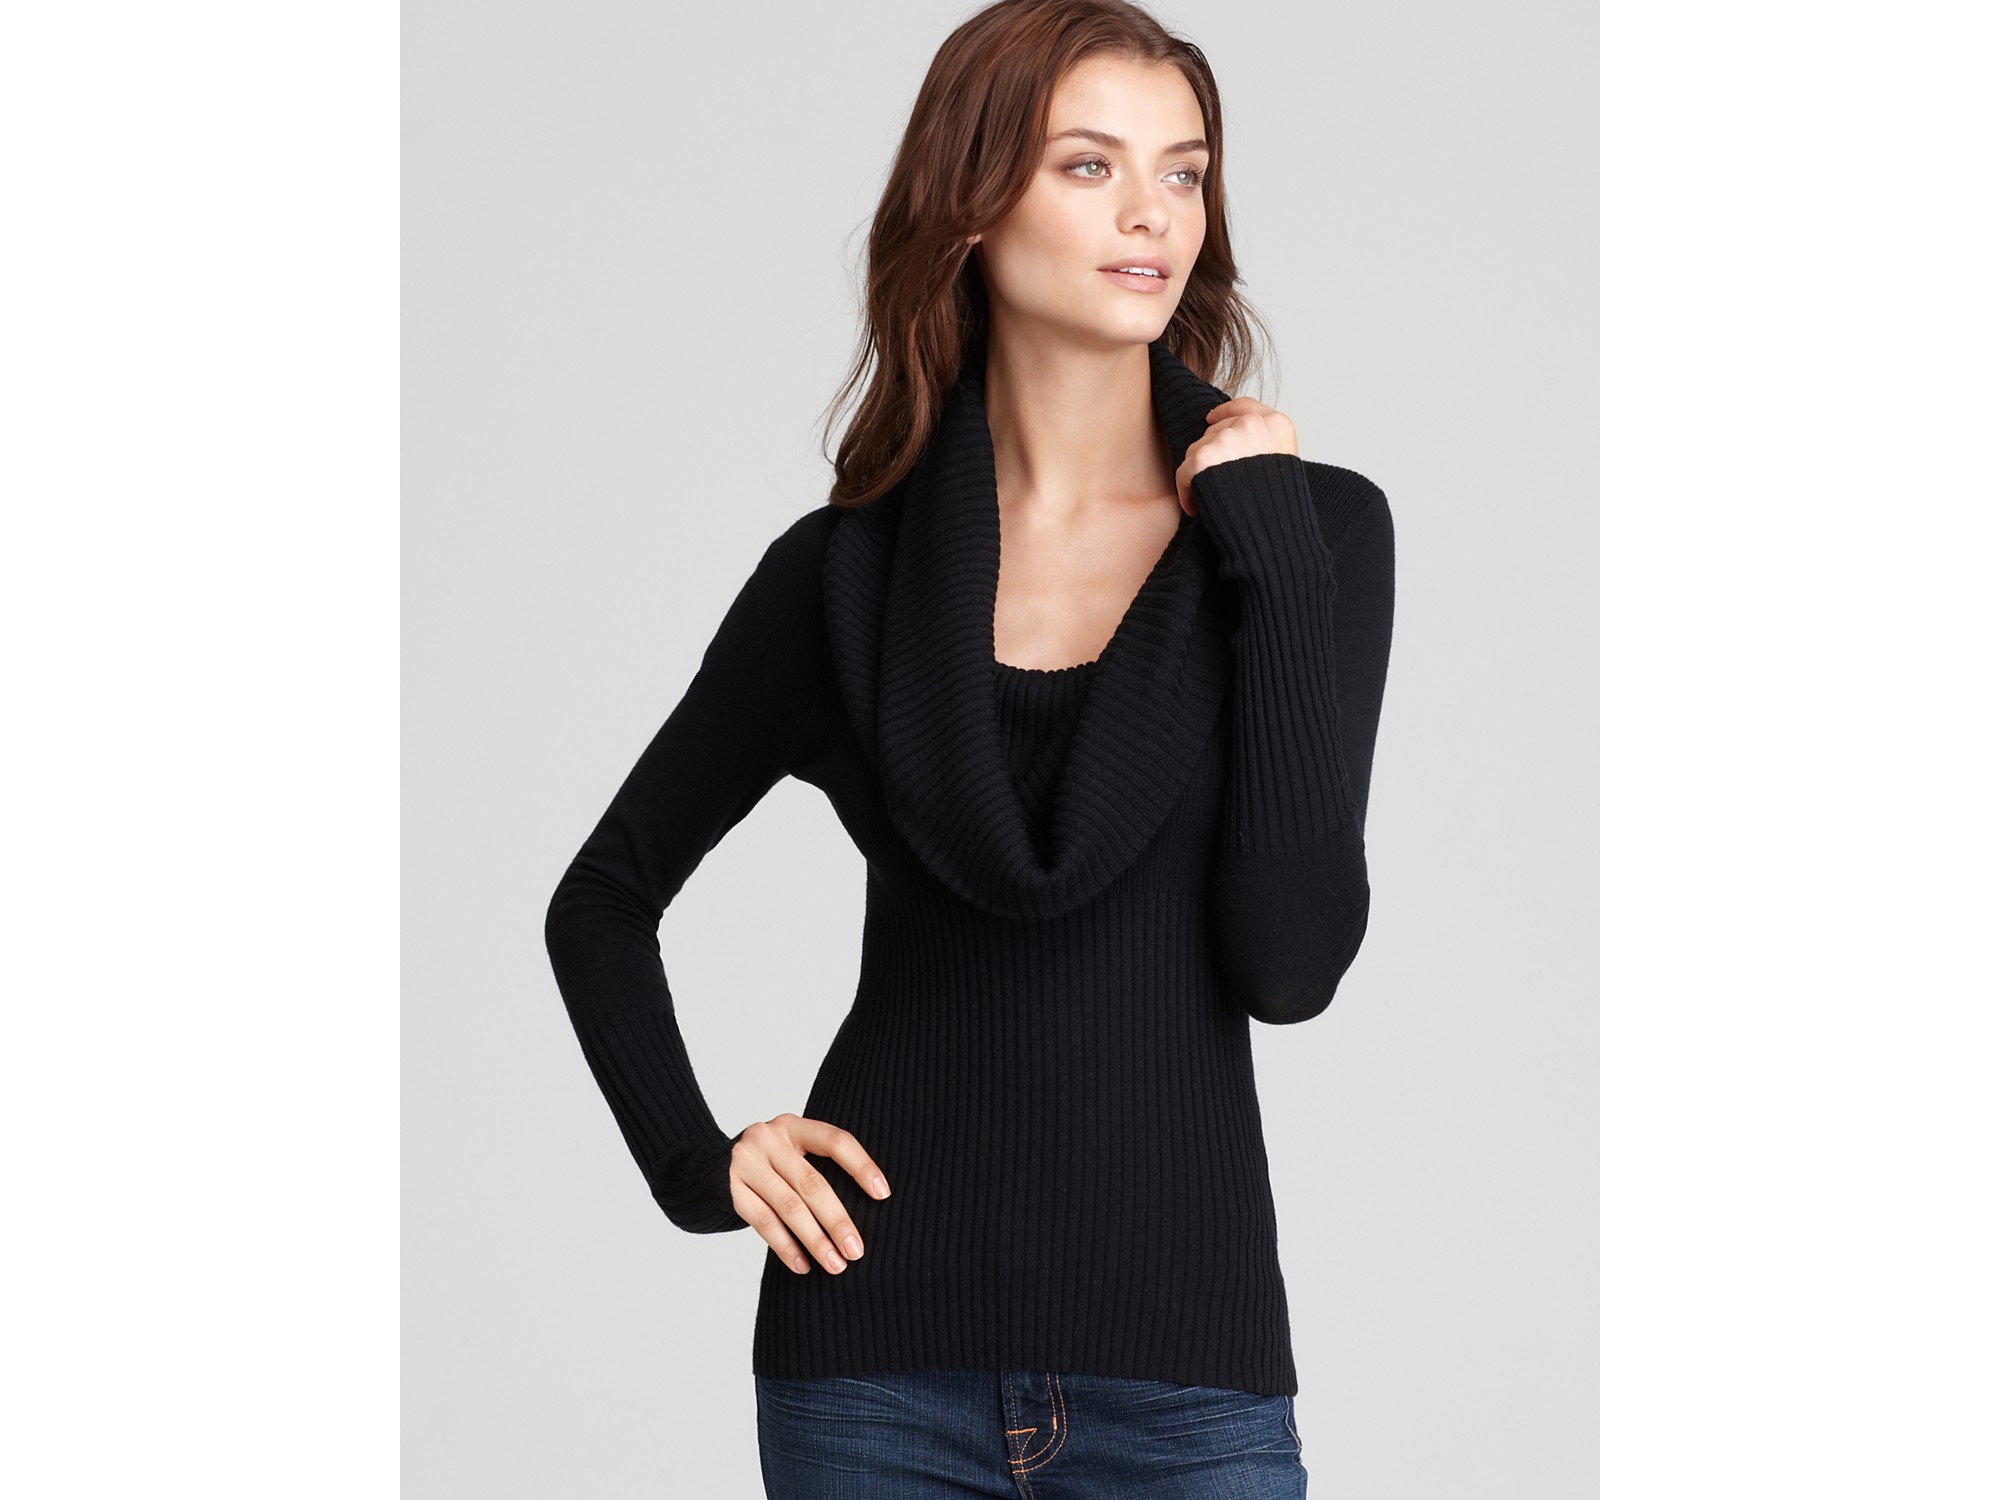 Bcbgmaxazria Perry Oversized Cowlneck Pullover Sweater in Black | Lyst